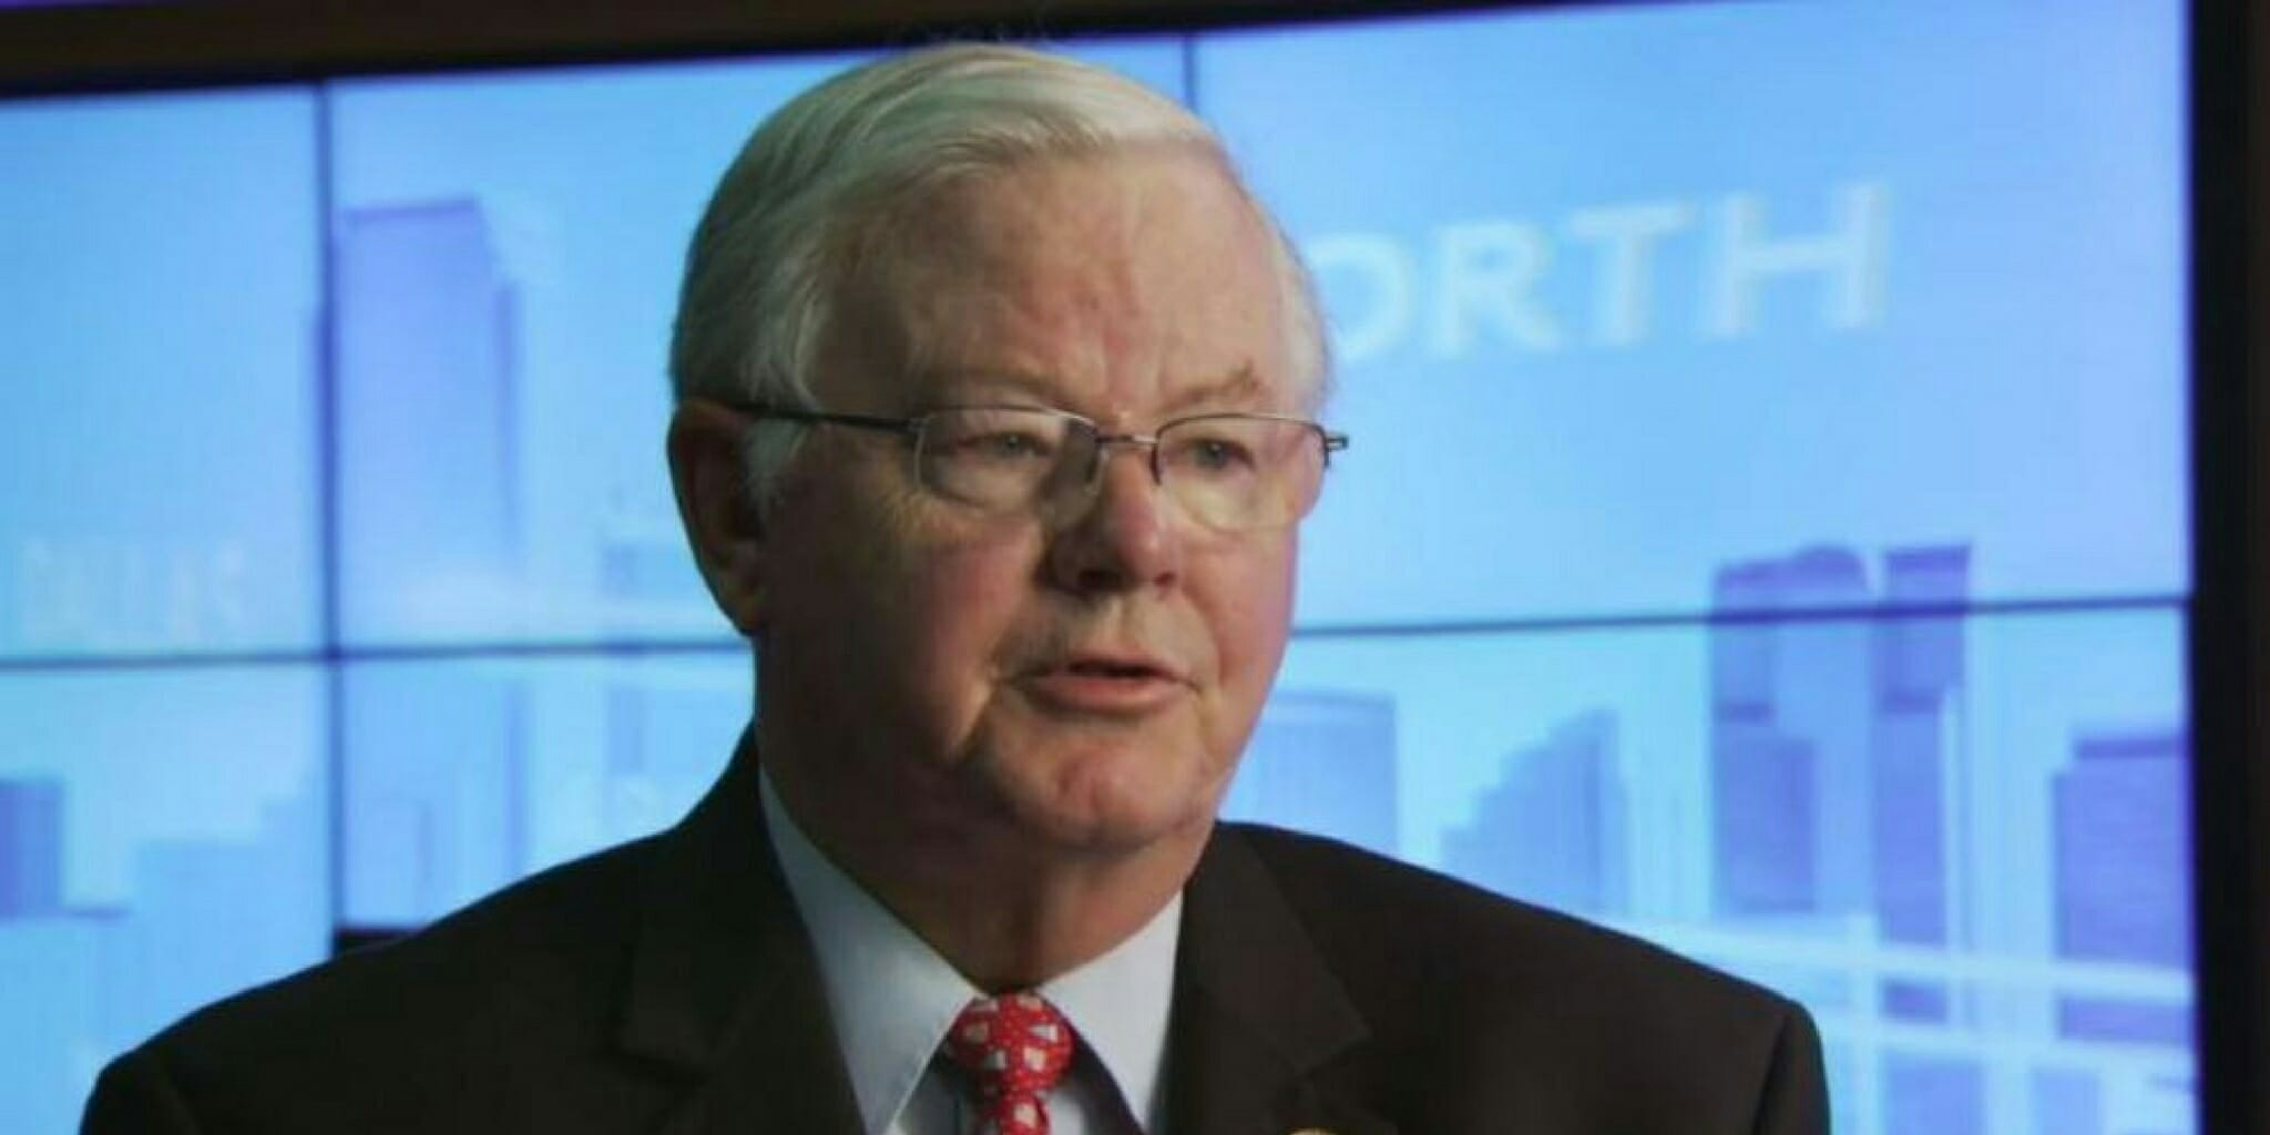 Joe Barton was recorded threatening to call Capitol Police on a woman who had secret information on his sex life.